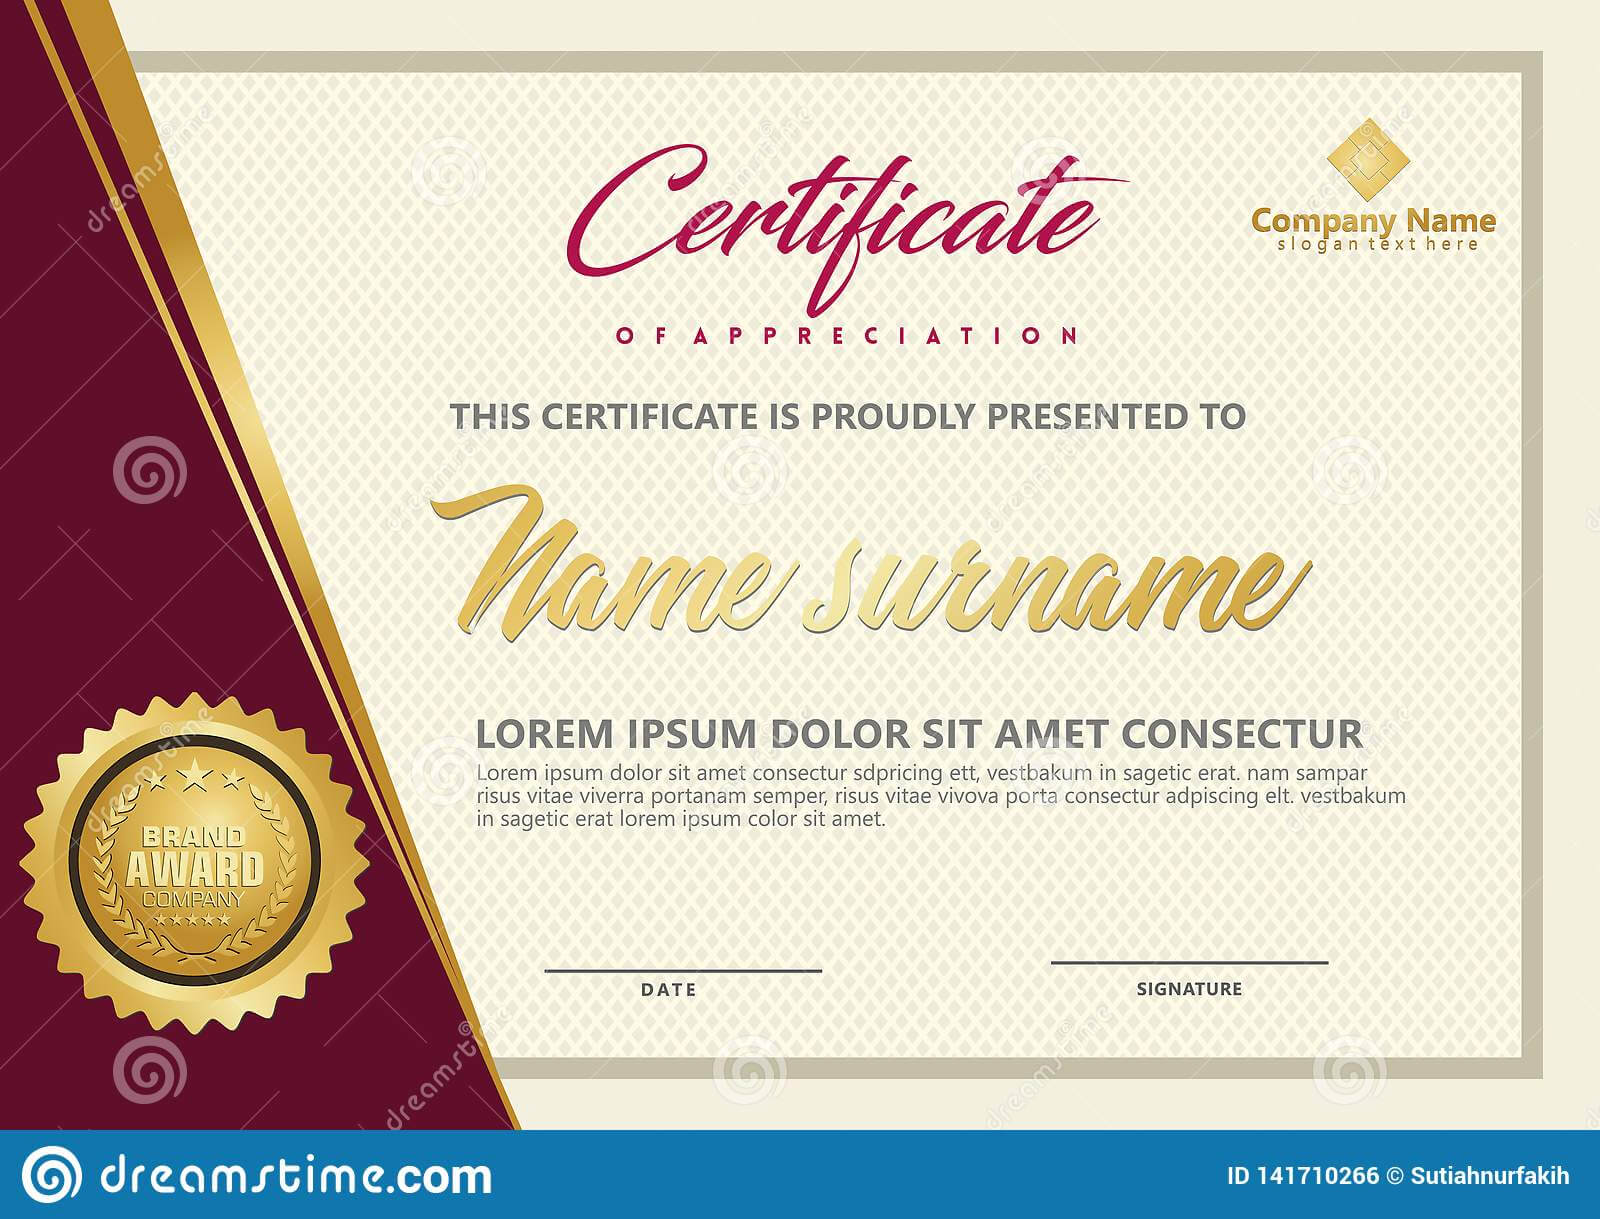 Elegant Certificate Template Vector With Luxury And Modern Pertaining To Workshop Certificate Template